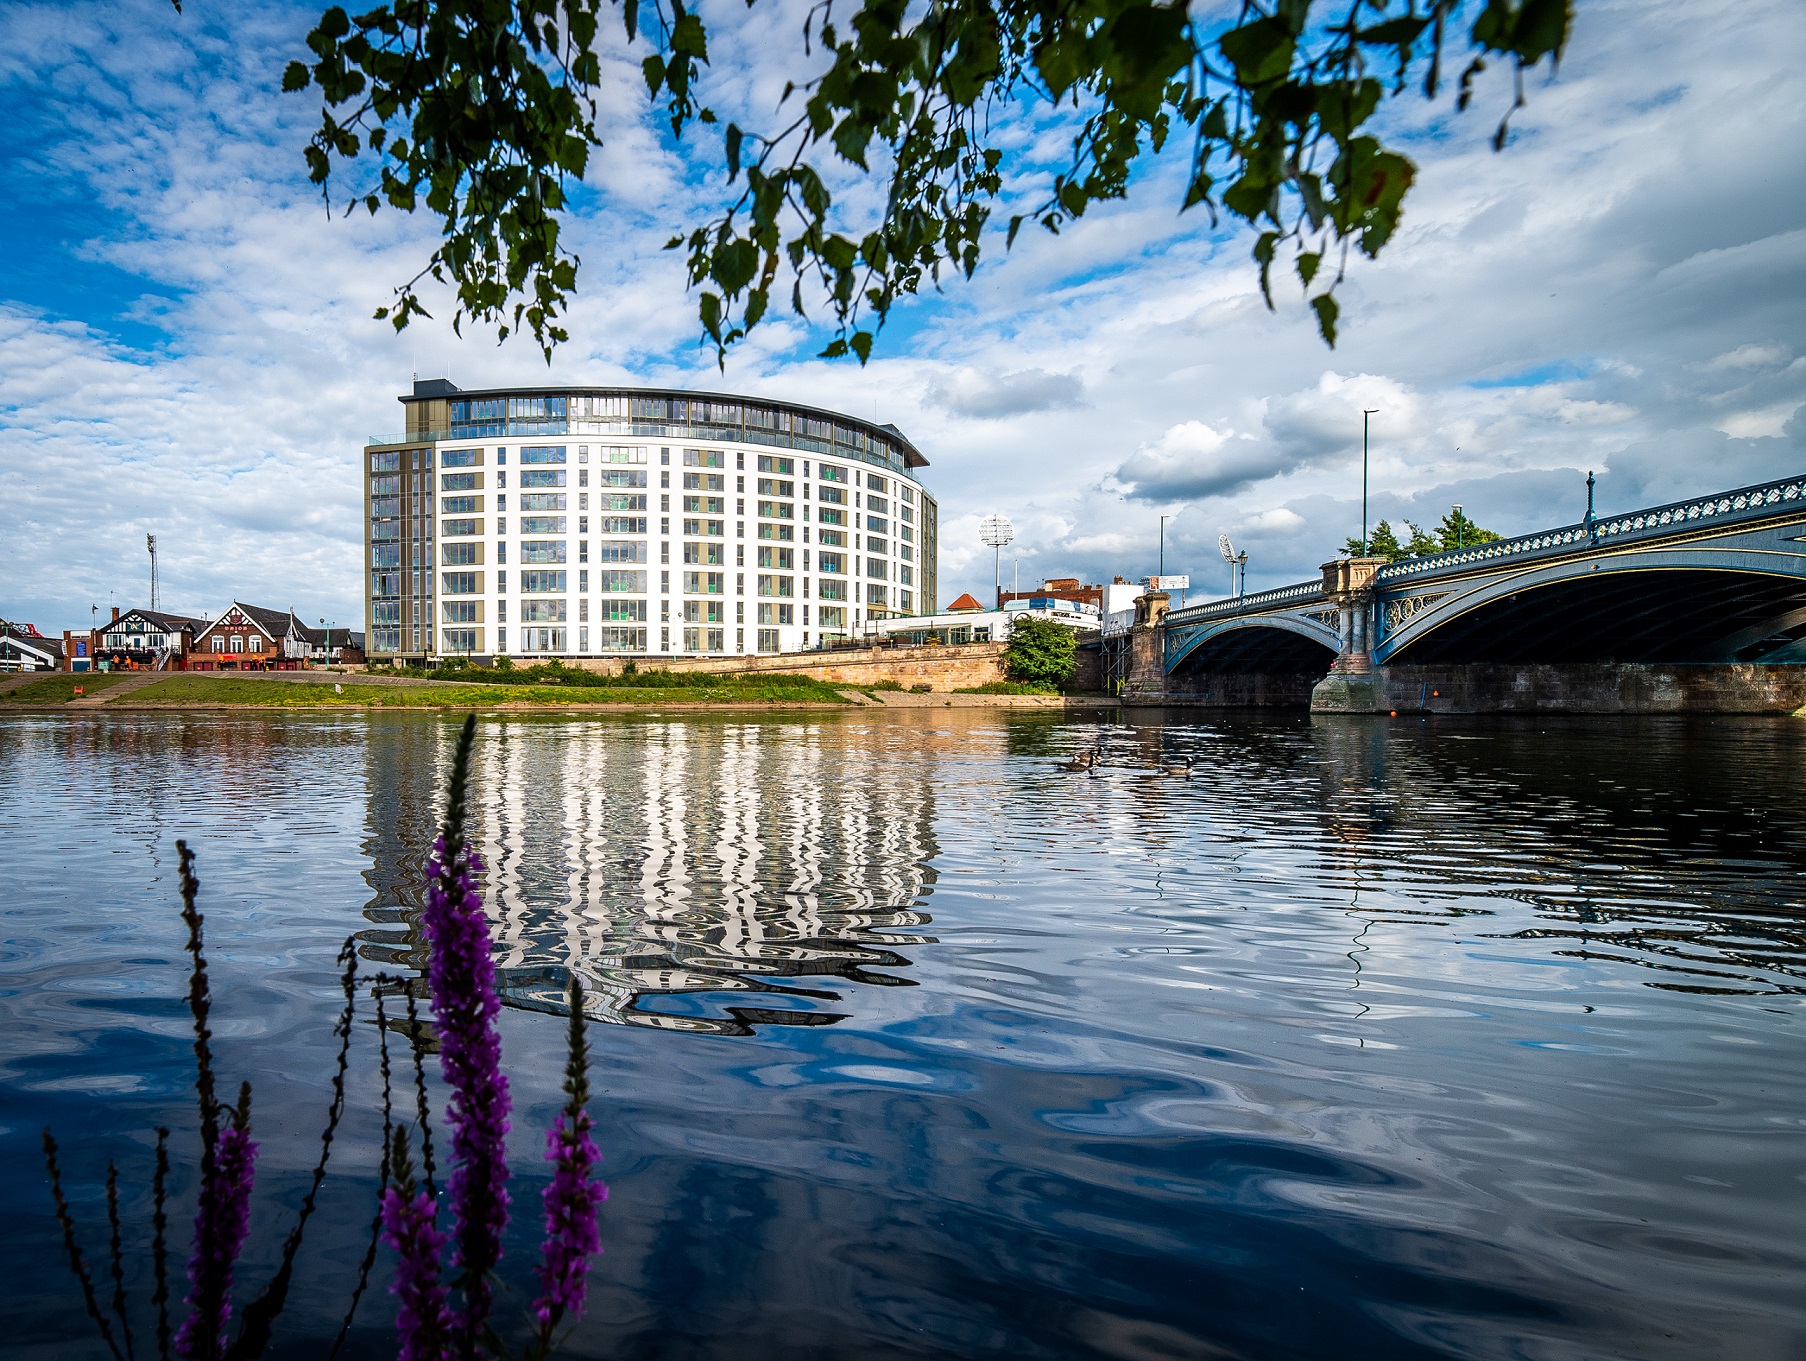 Show penthouse and apartment now open at The Waterside Apartments @NottsWaterside